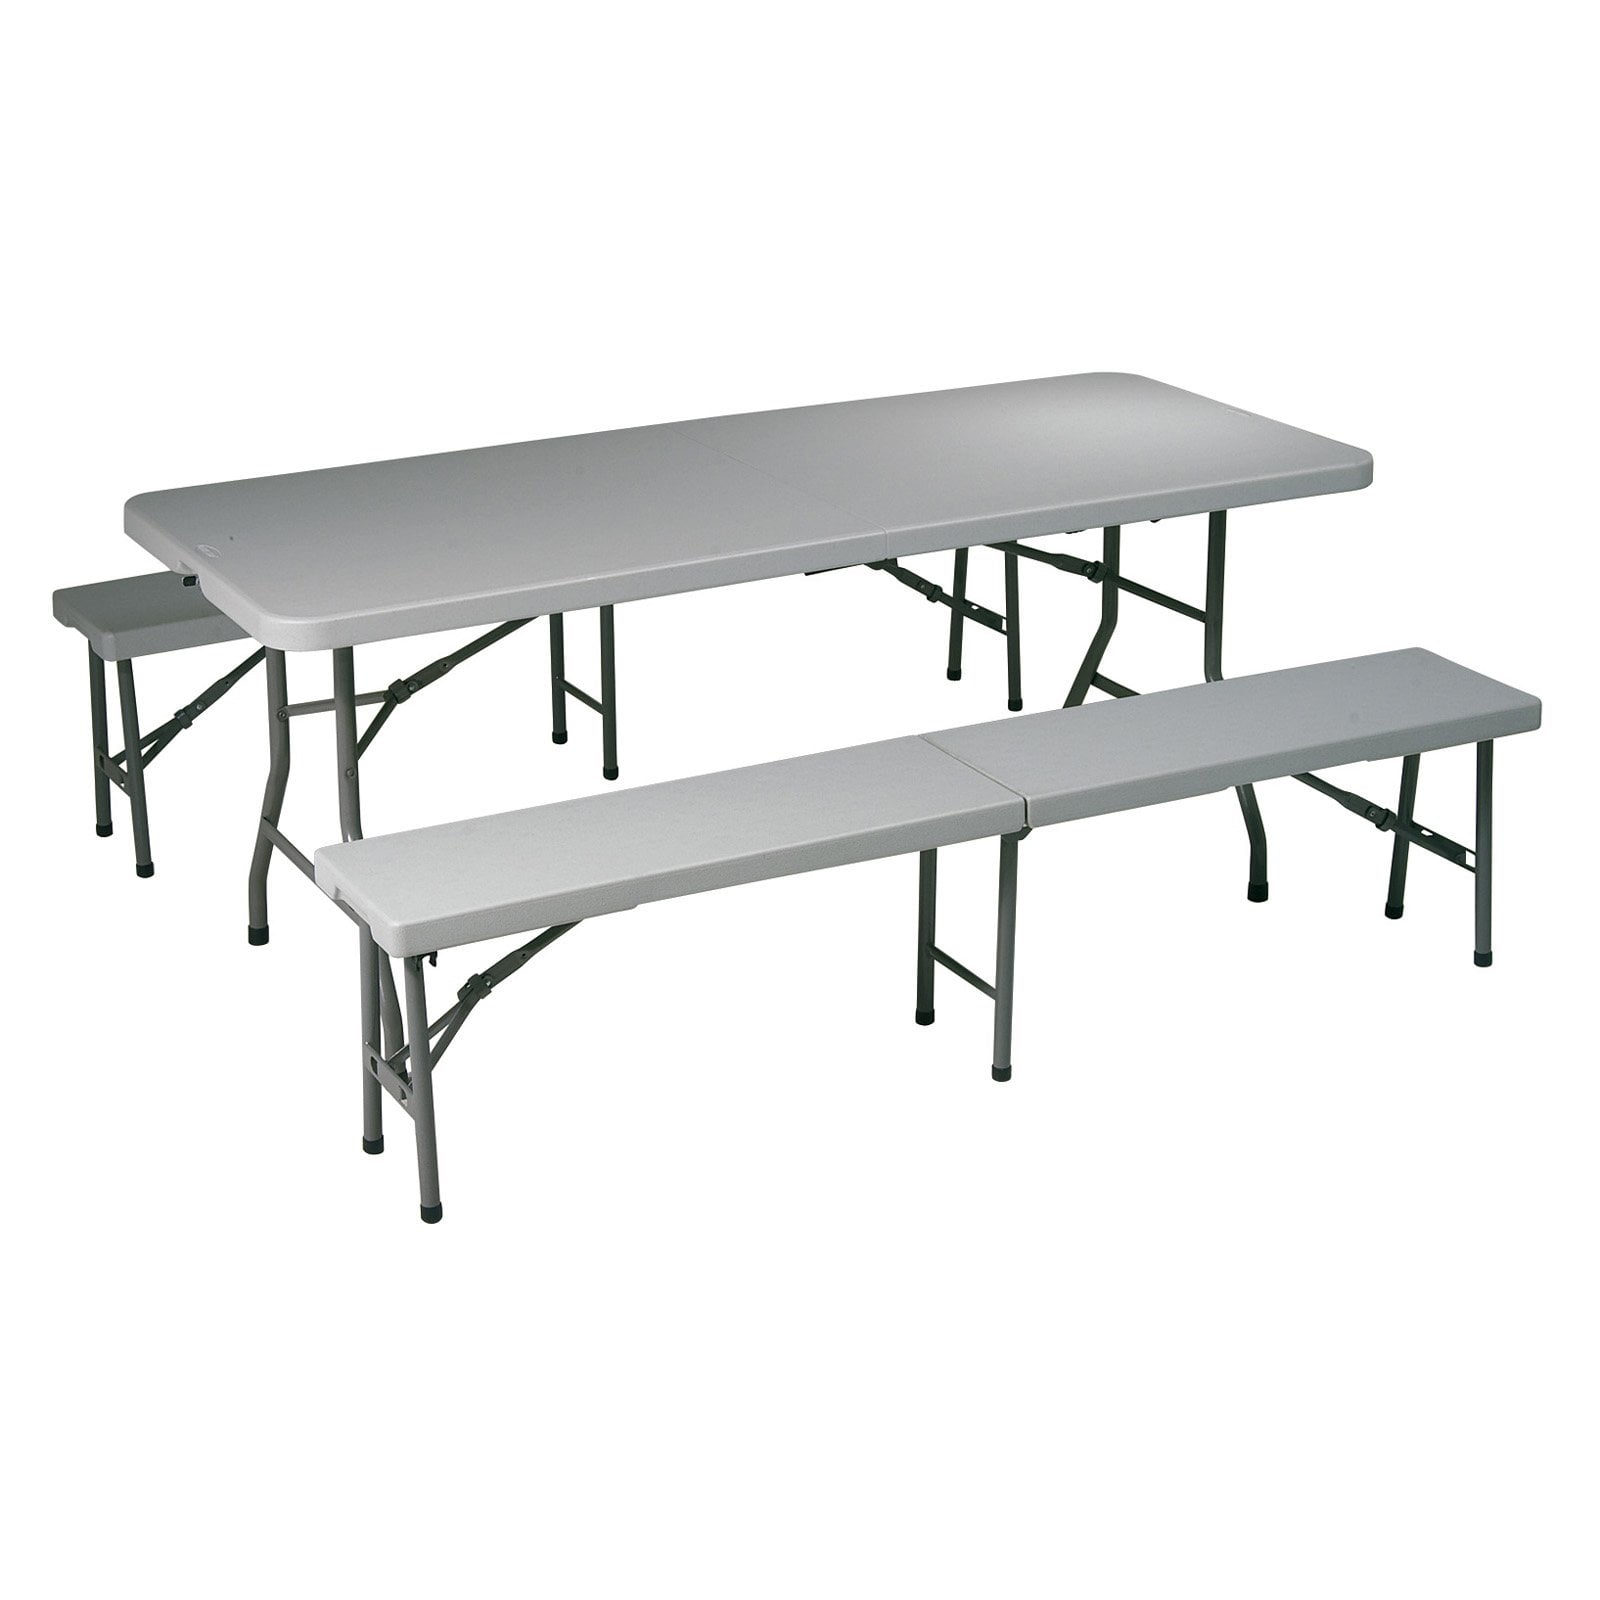 Folding portable table benches camping set garden dining furniture set foldable 